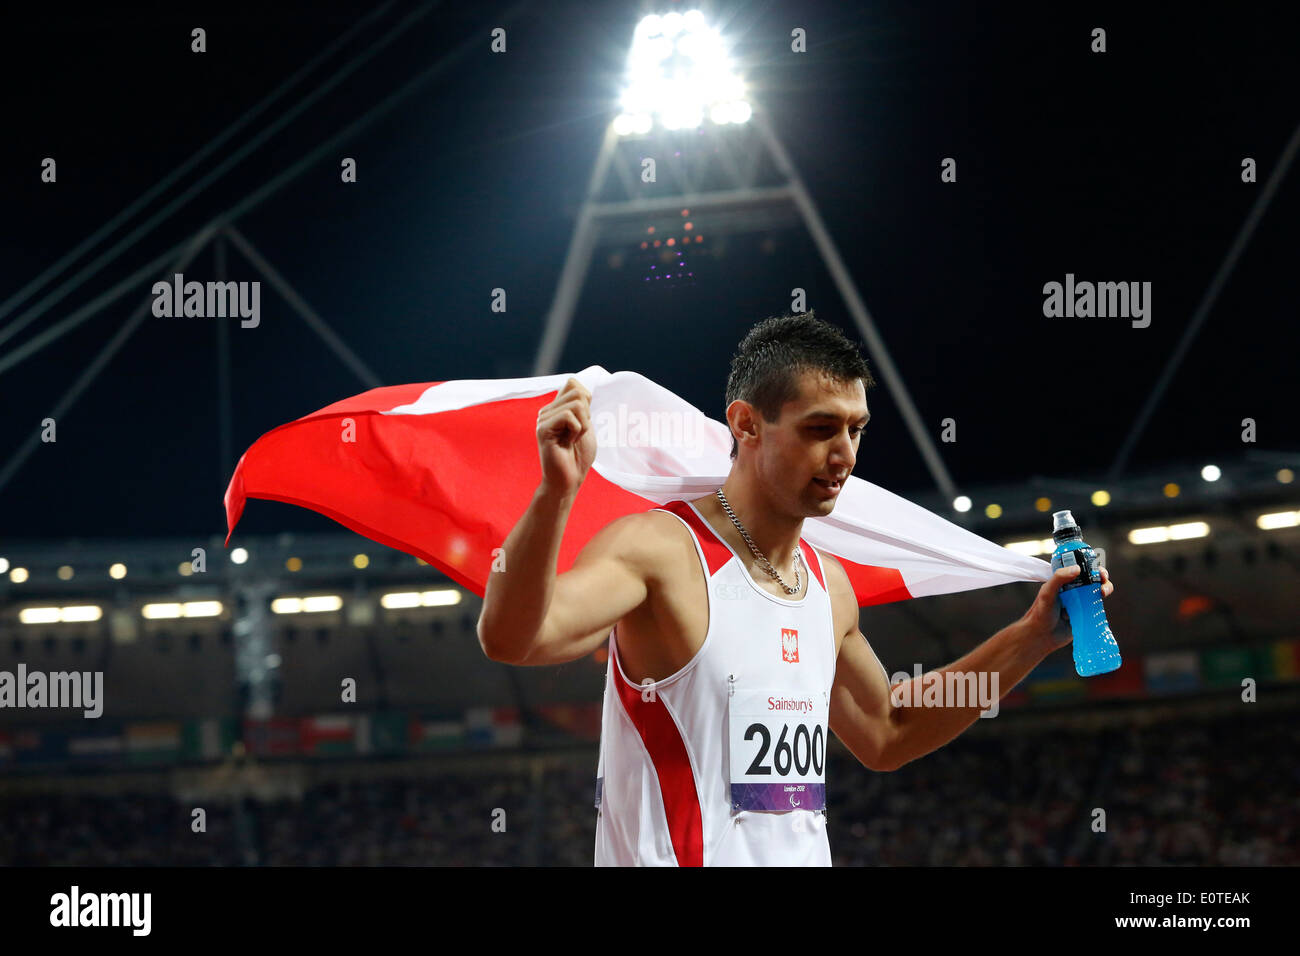 Mateusz Michalski of Poland celebrates winning gold following the men's 200m - T12 final at the Olympic Stadium during the London 2012 Paralympic Games, London, Britain, 08 September 2012. Stock Photo